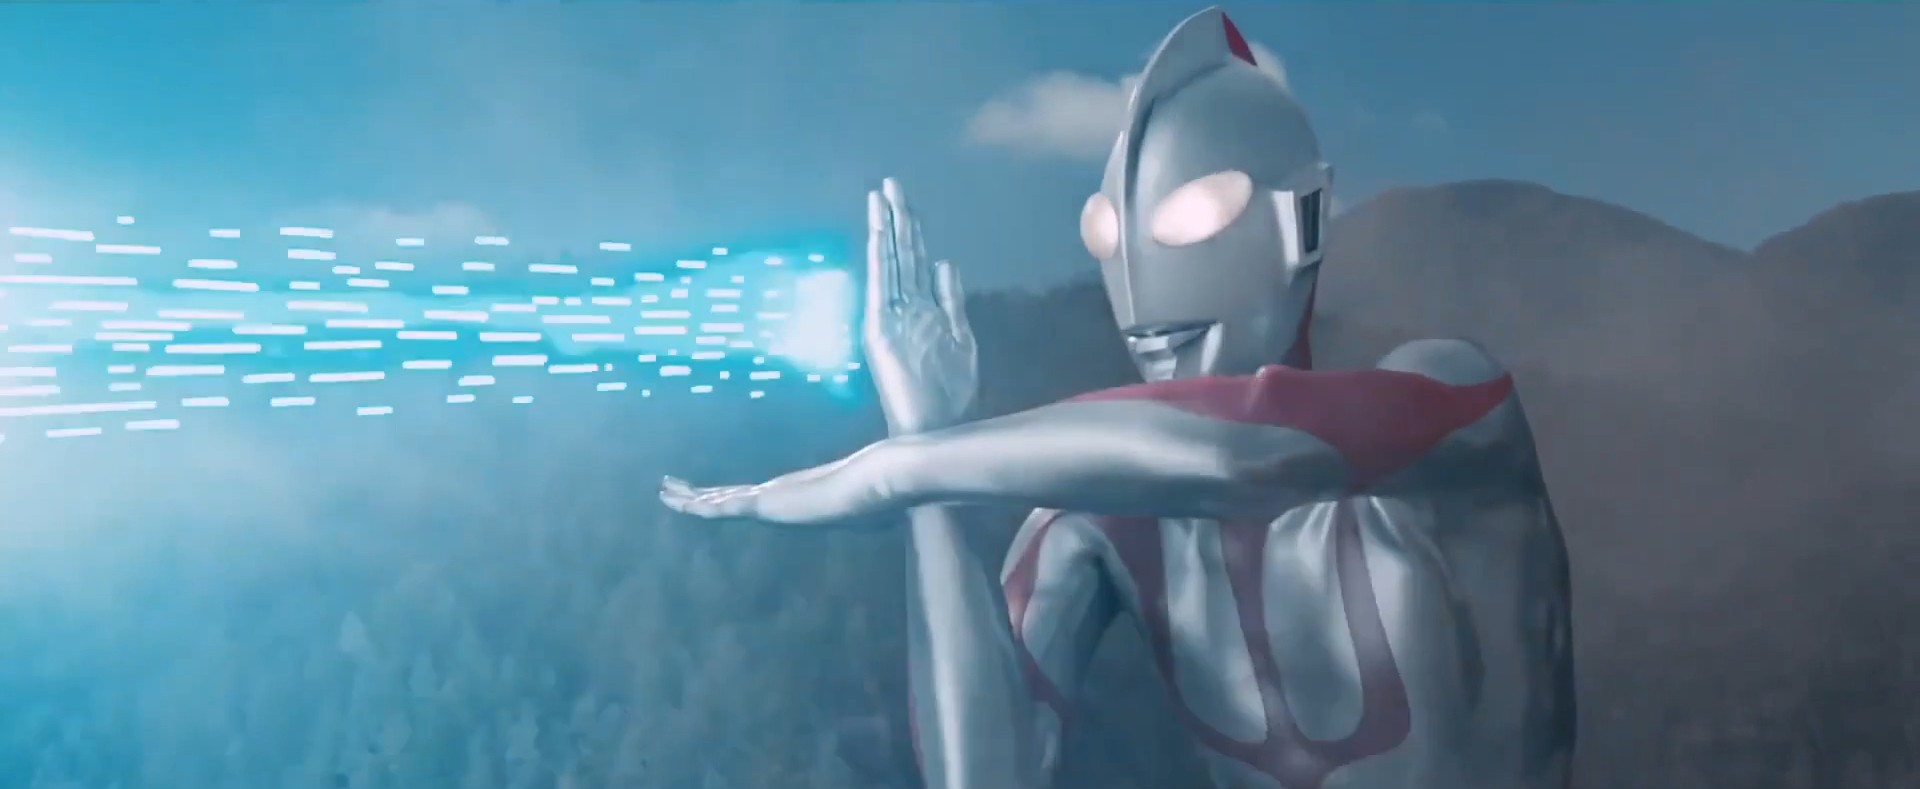 Ultraman holds his forearms together to create his Spacium ray, which shoots out in front of him.